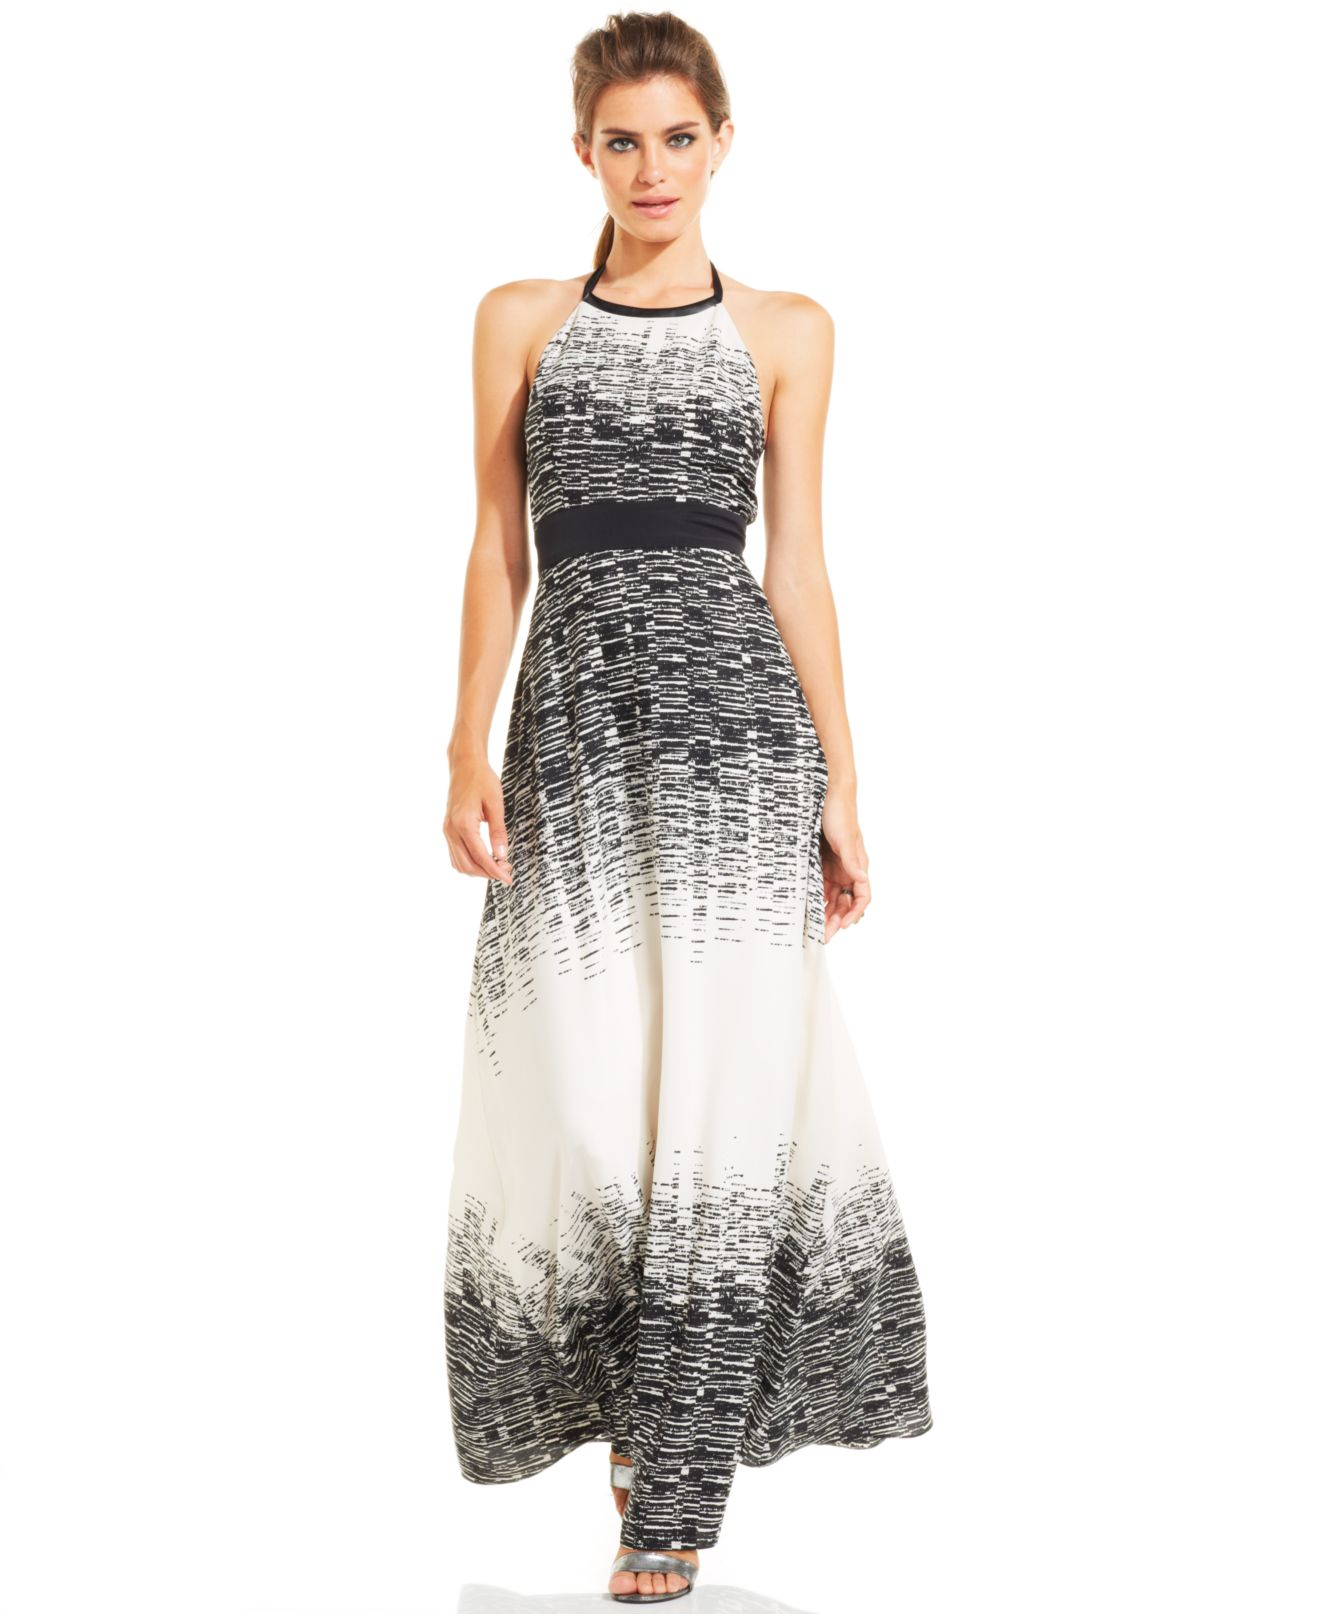 Lyst - Vince Camuto Graphicprint Halter Maxi Dress in White